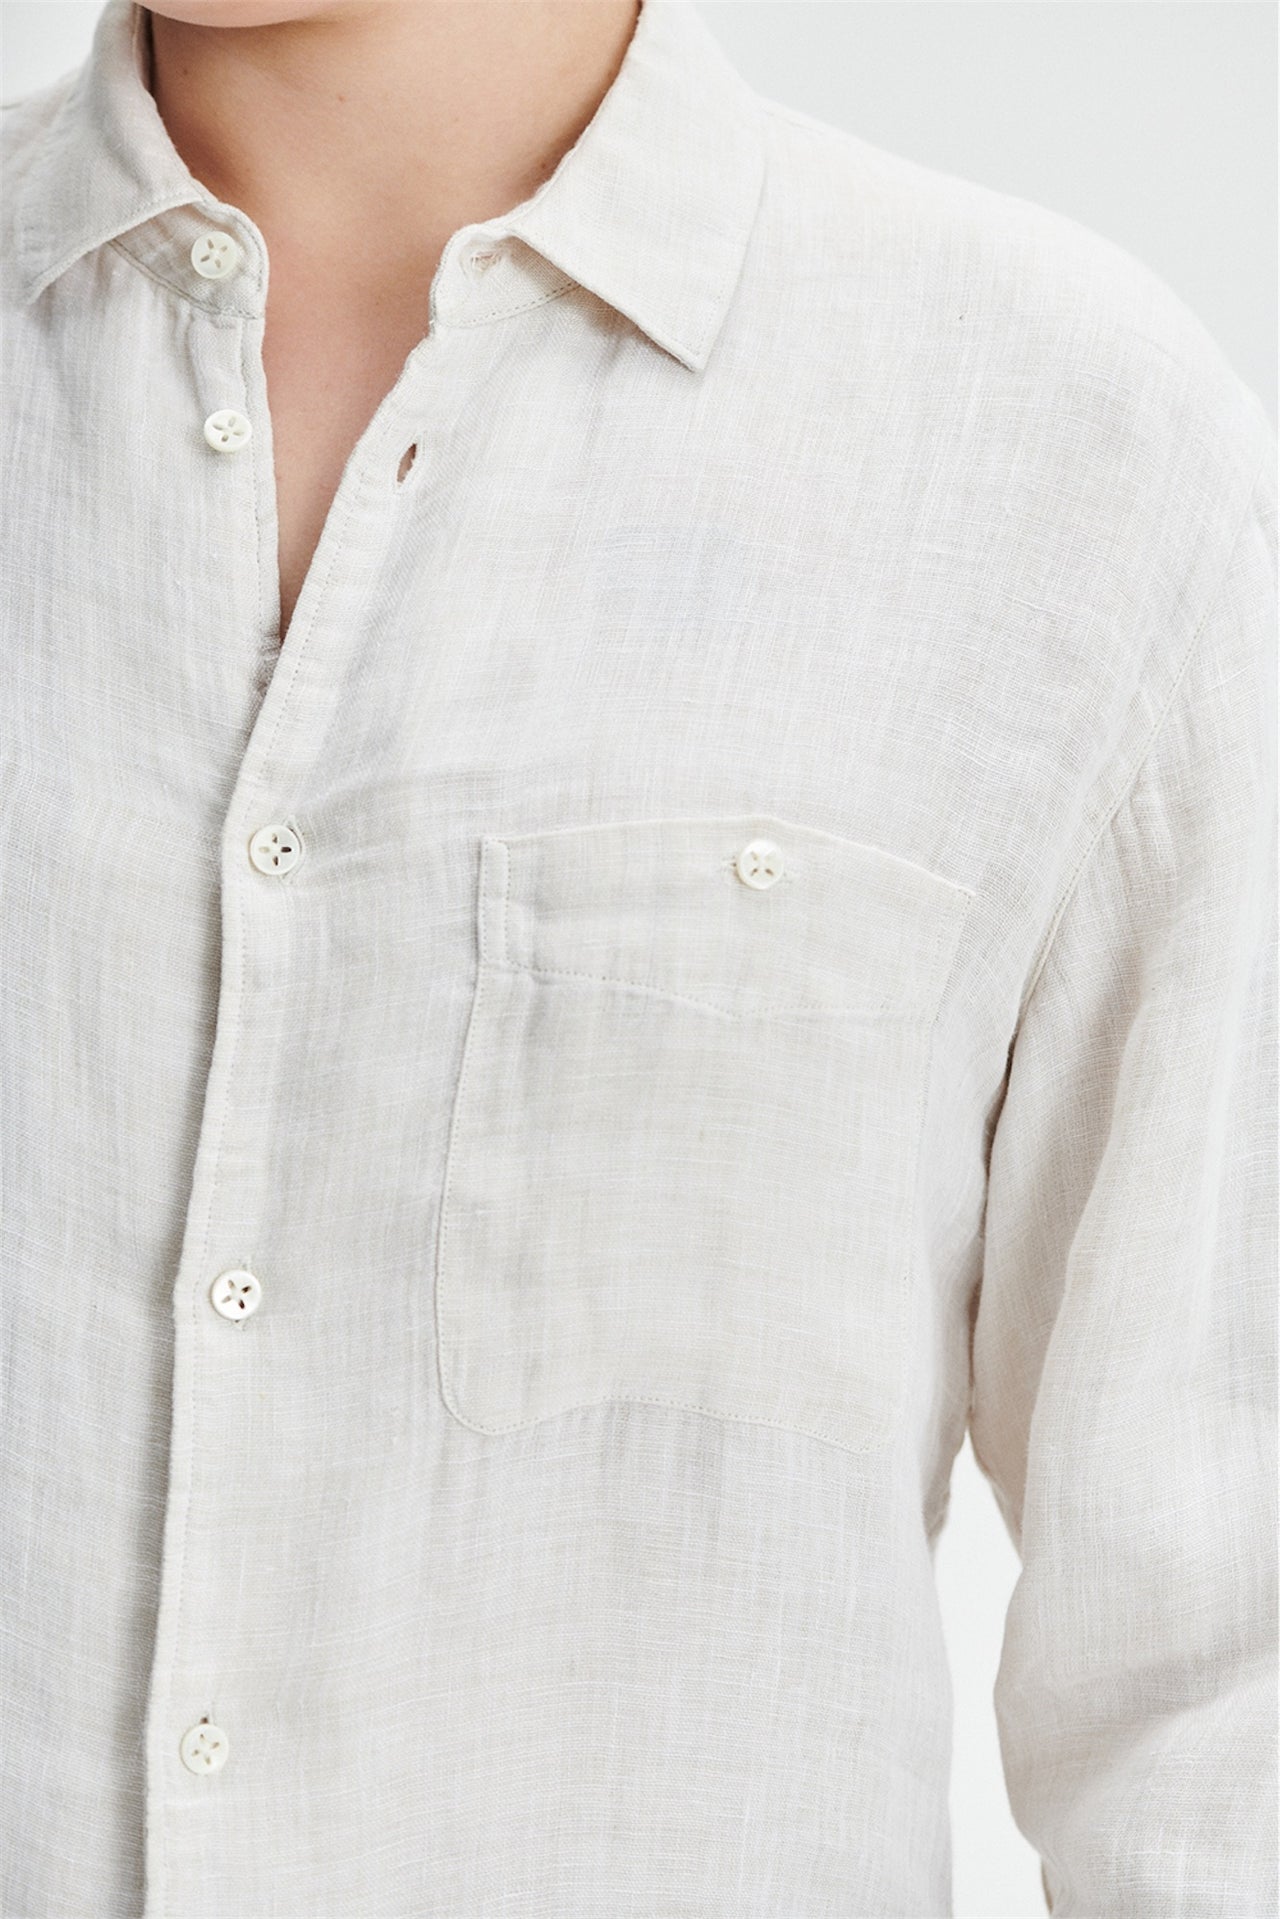 Strong Shirt in a Double Sided Off-White Fatigue Italian Linen and Cotton